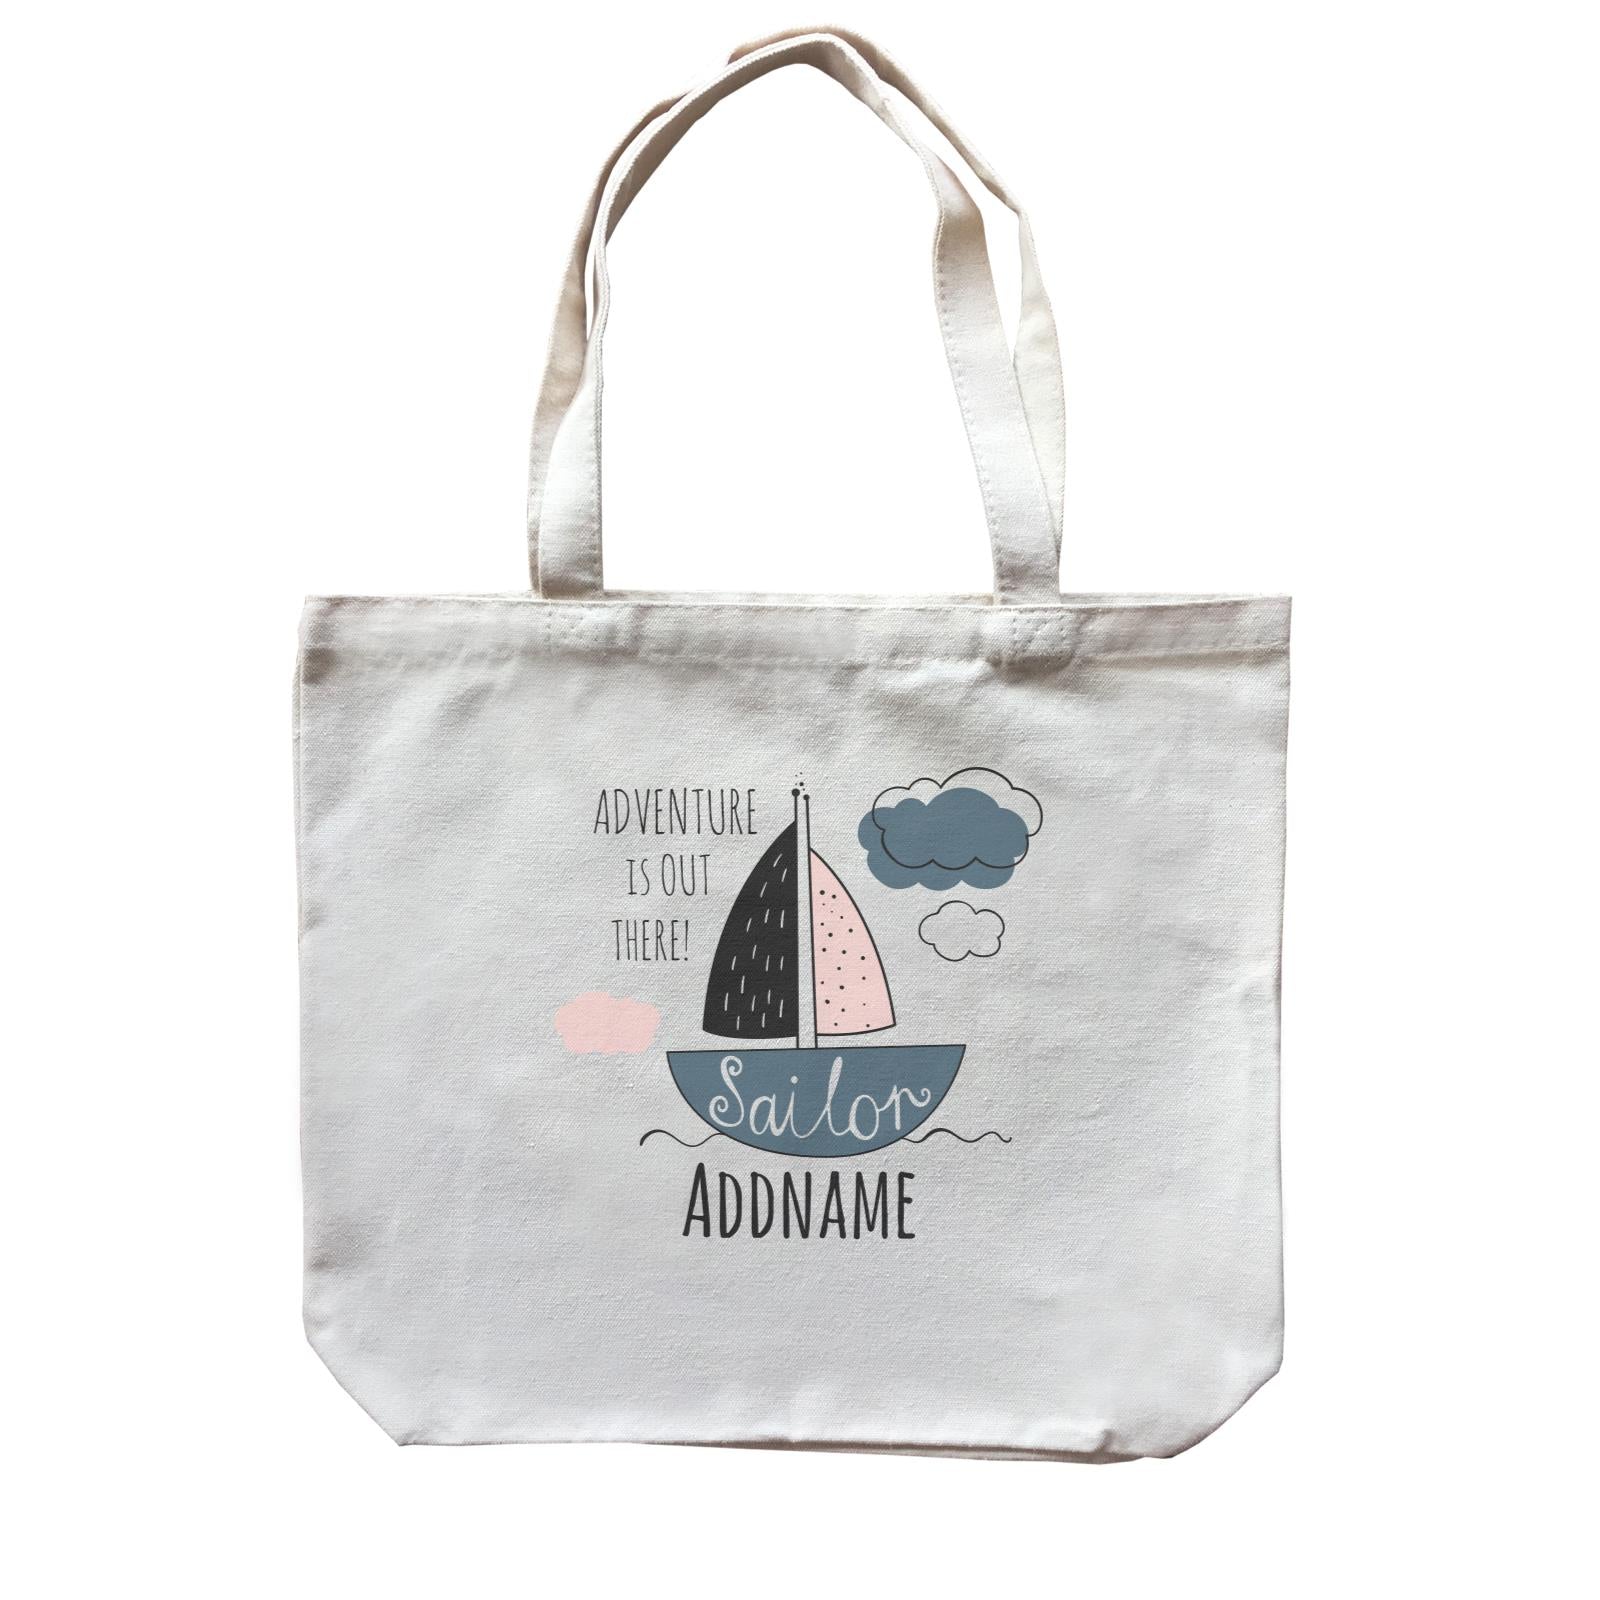 Drawn Ocean Elements Sailor Adventure is Out There Addname Canvas Bag